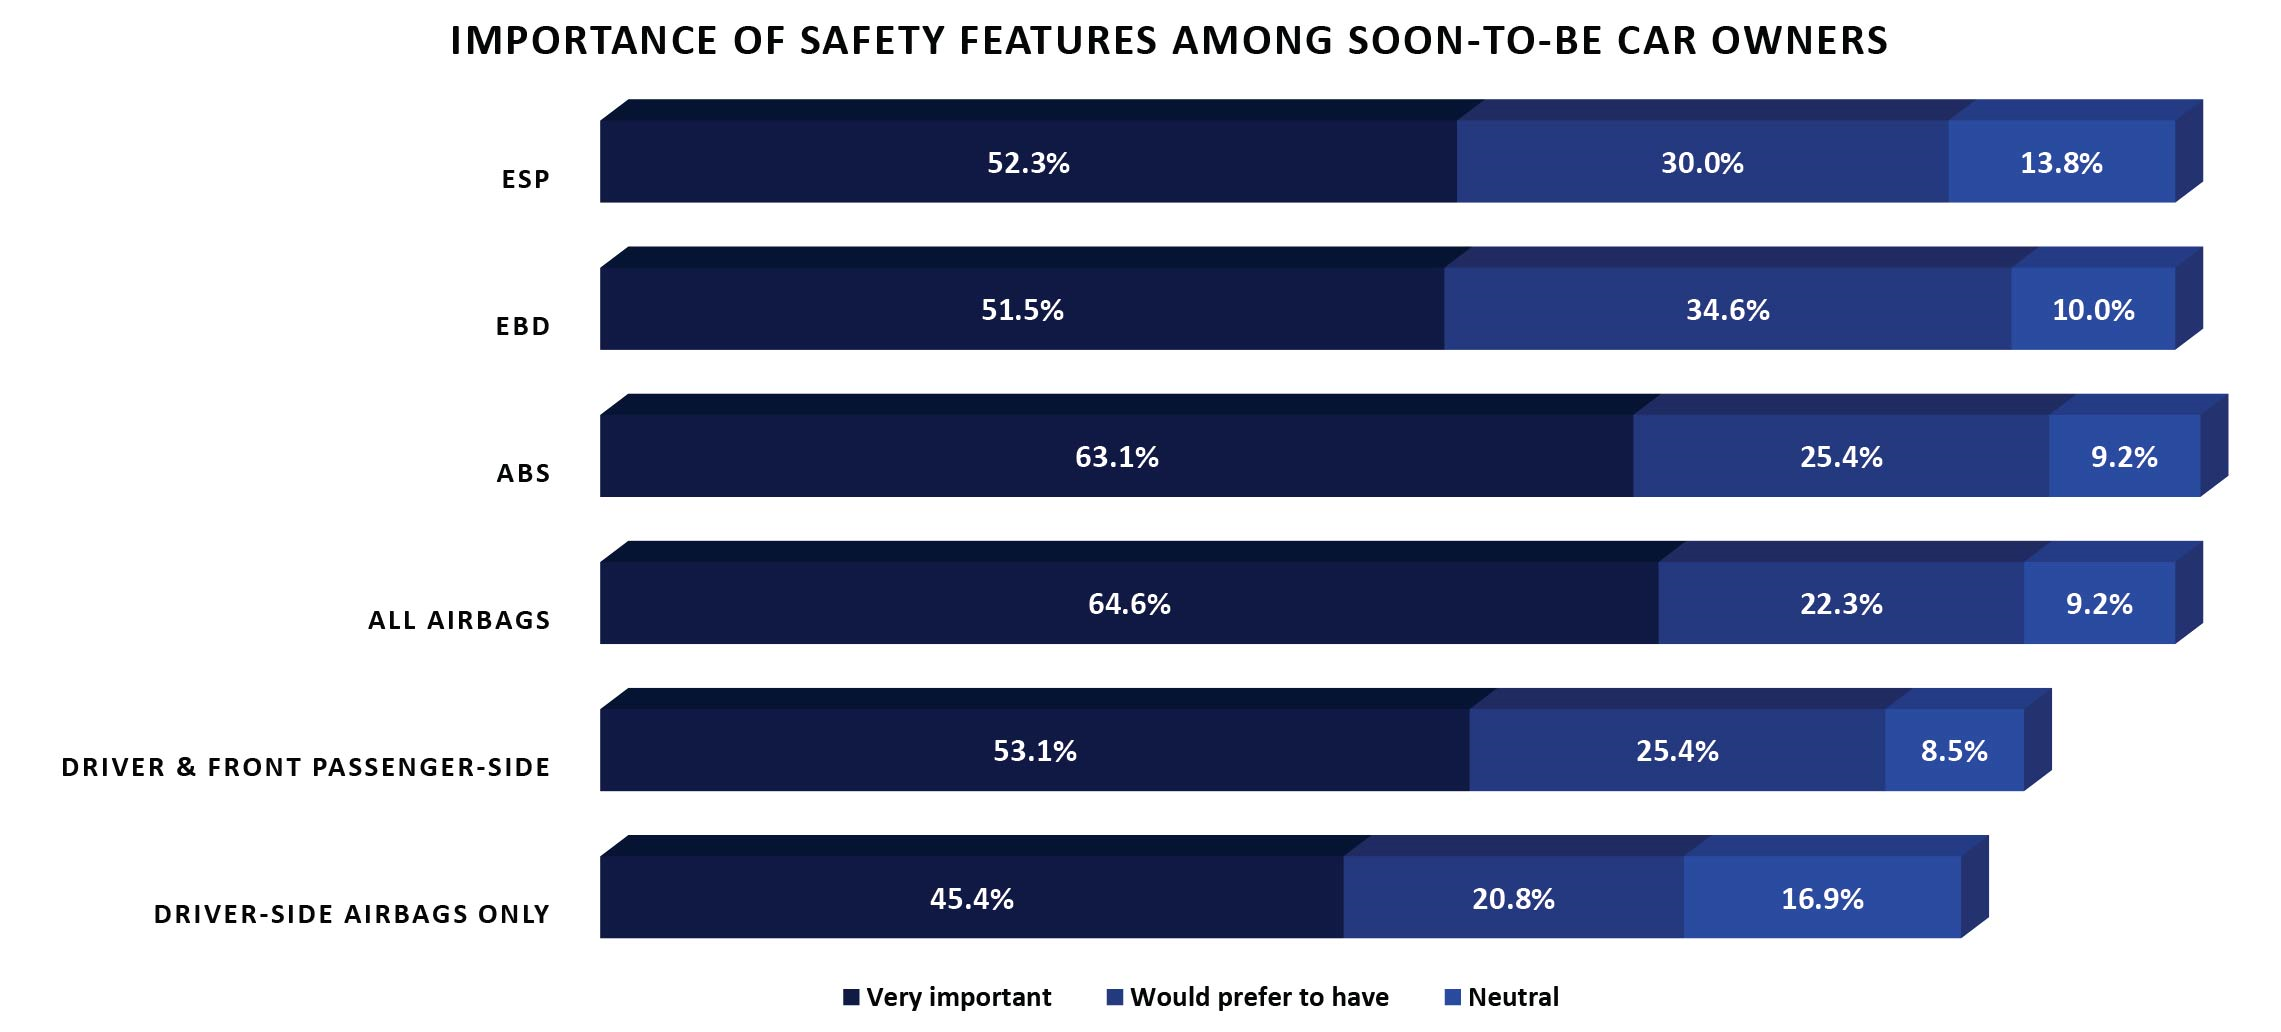 Importance Safety Features for Soon-To-Be Car Owners